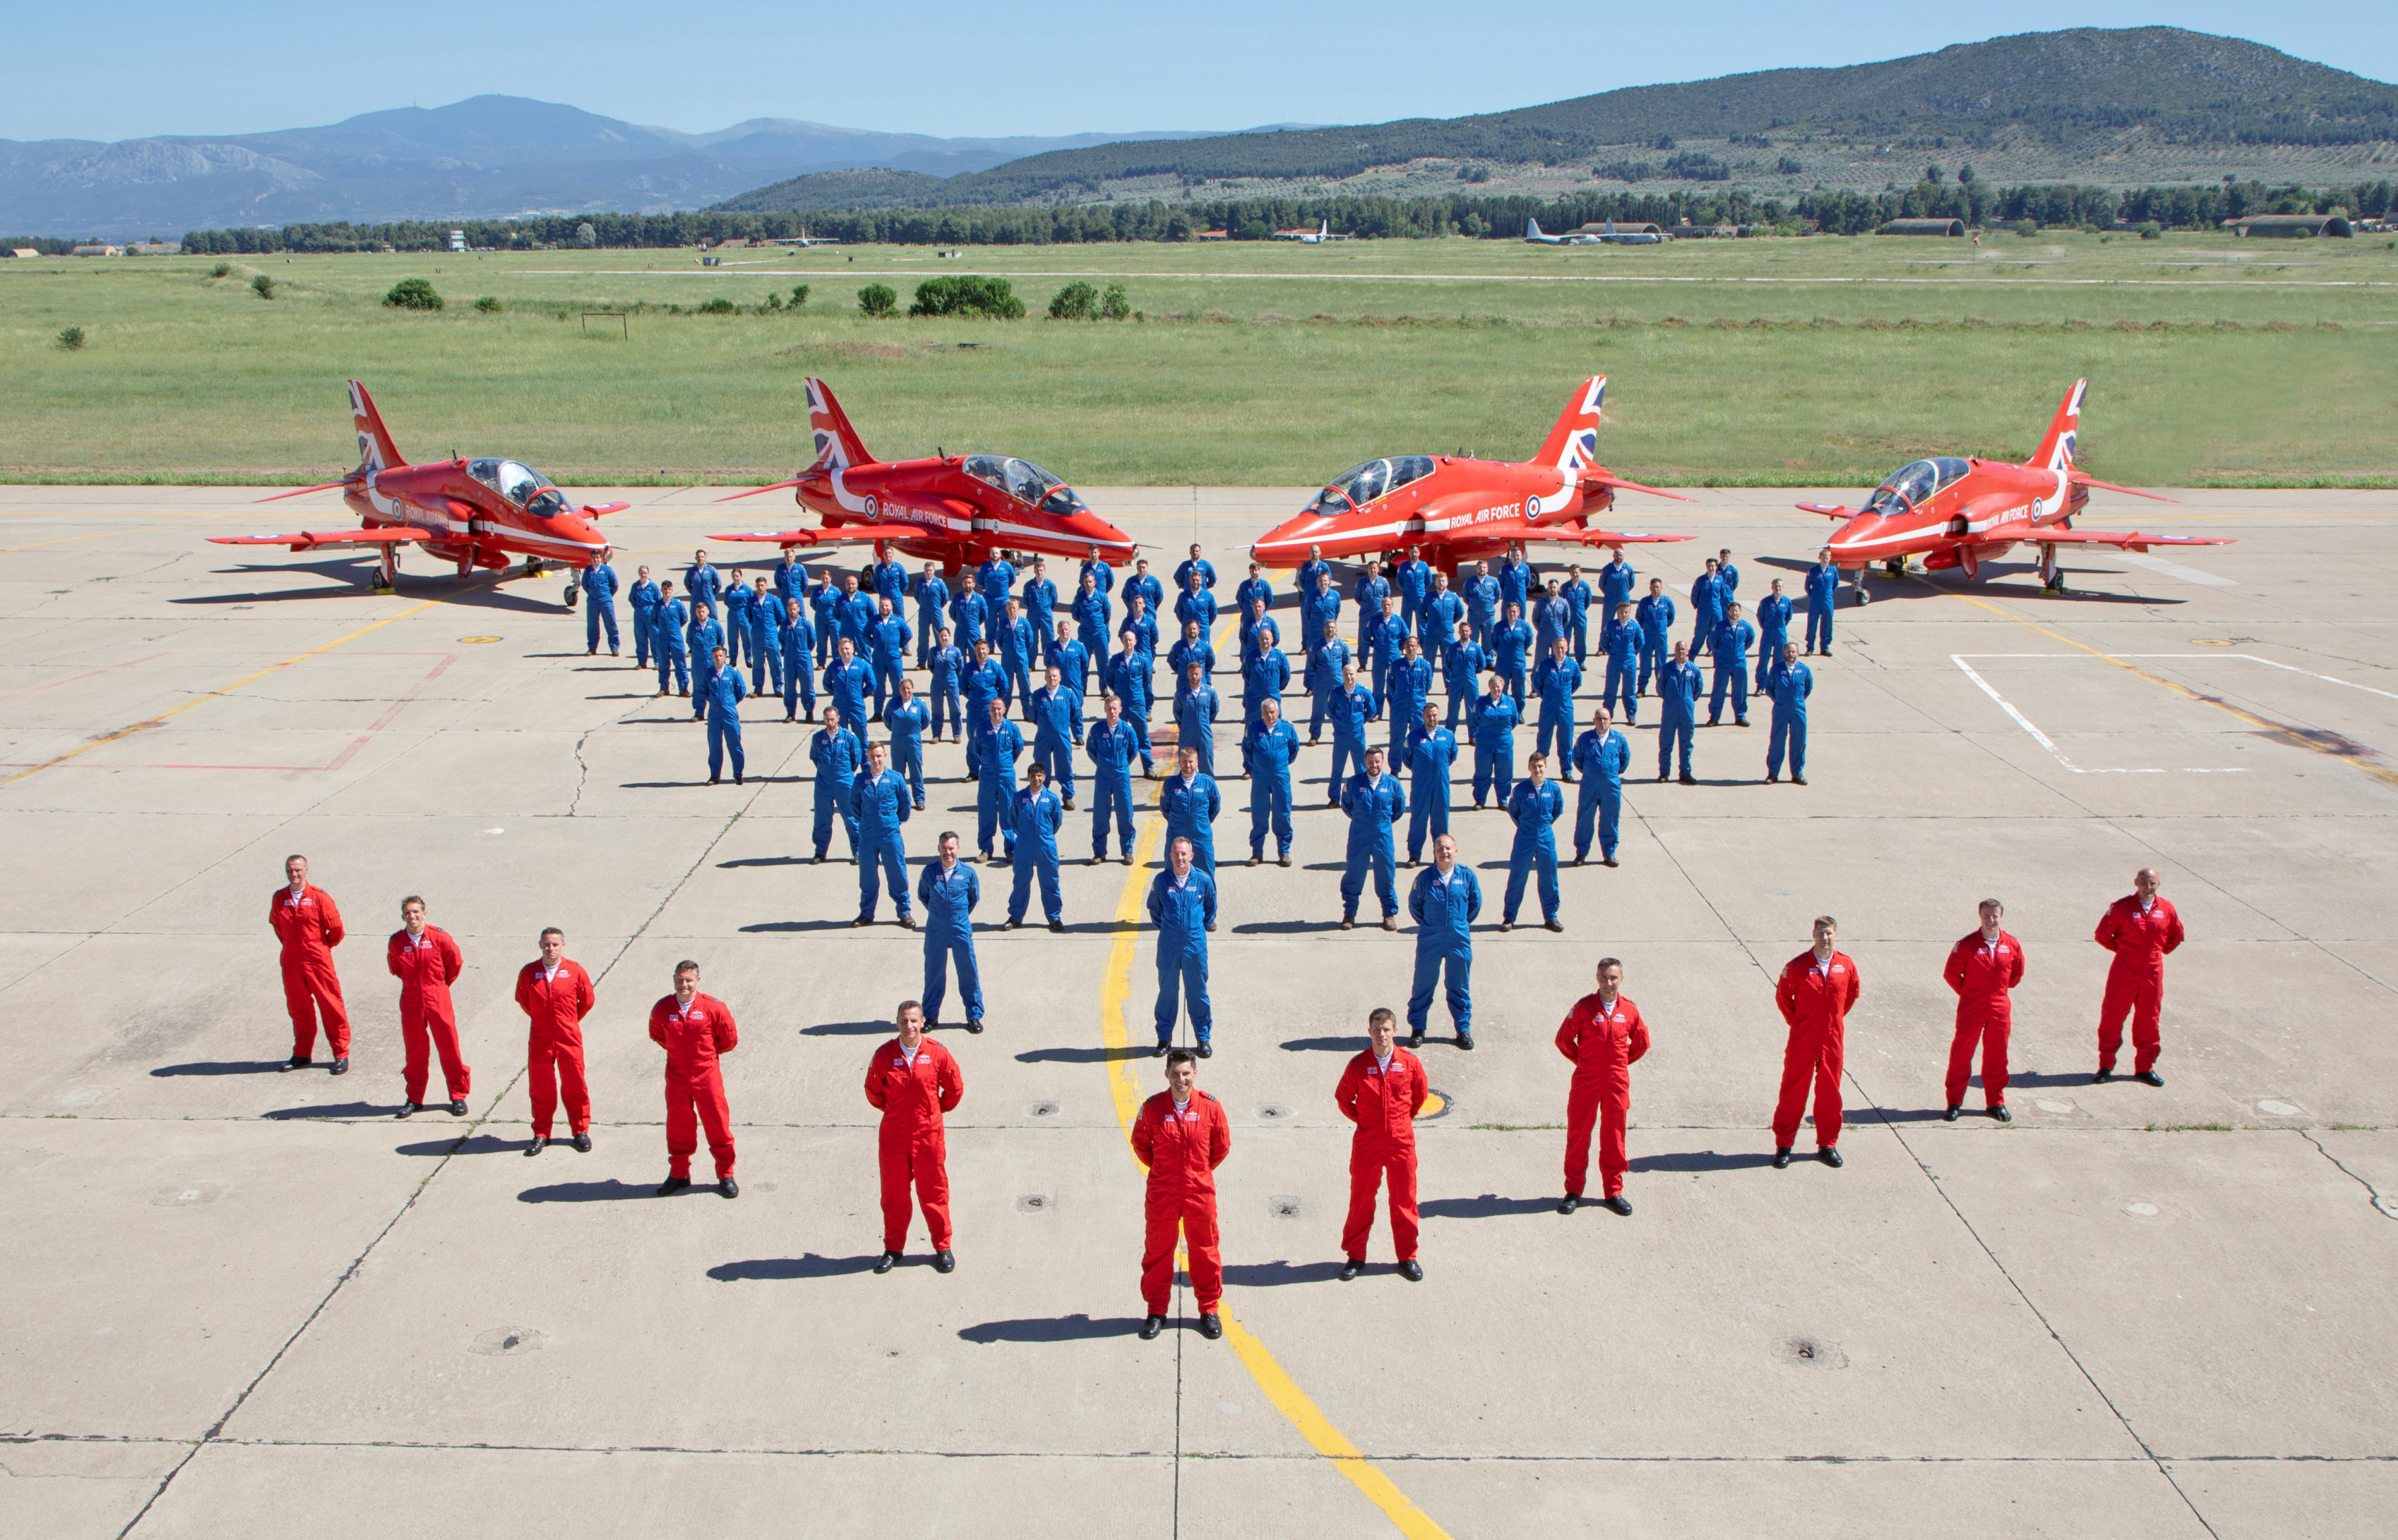 From the Red Arrows to Health and Safety on Wind Farms